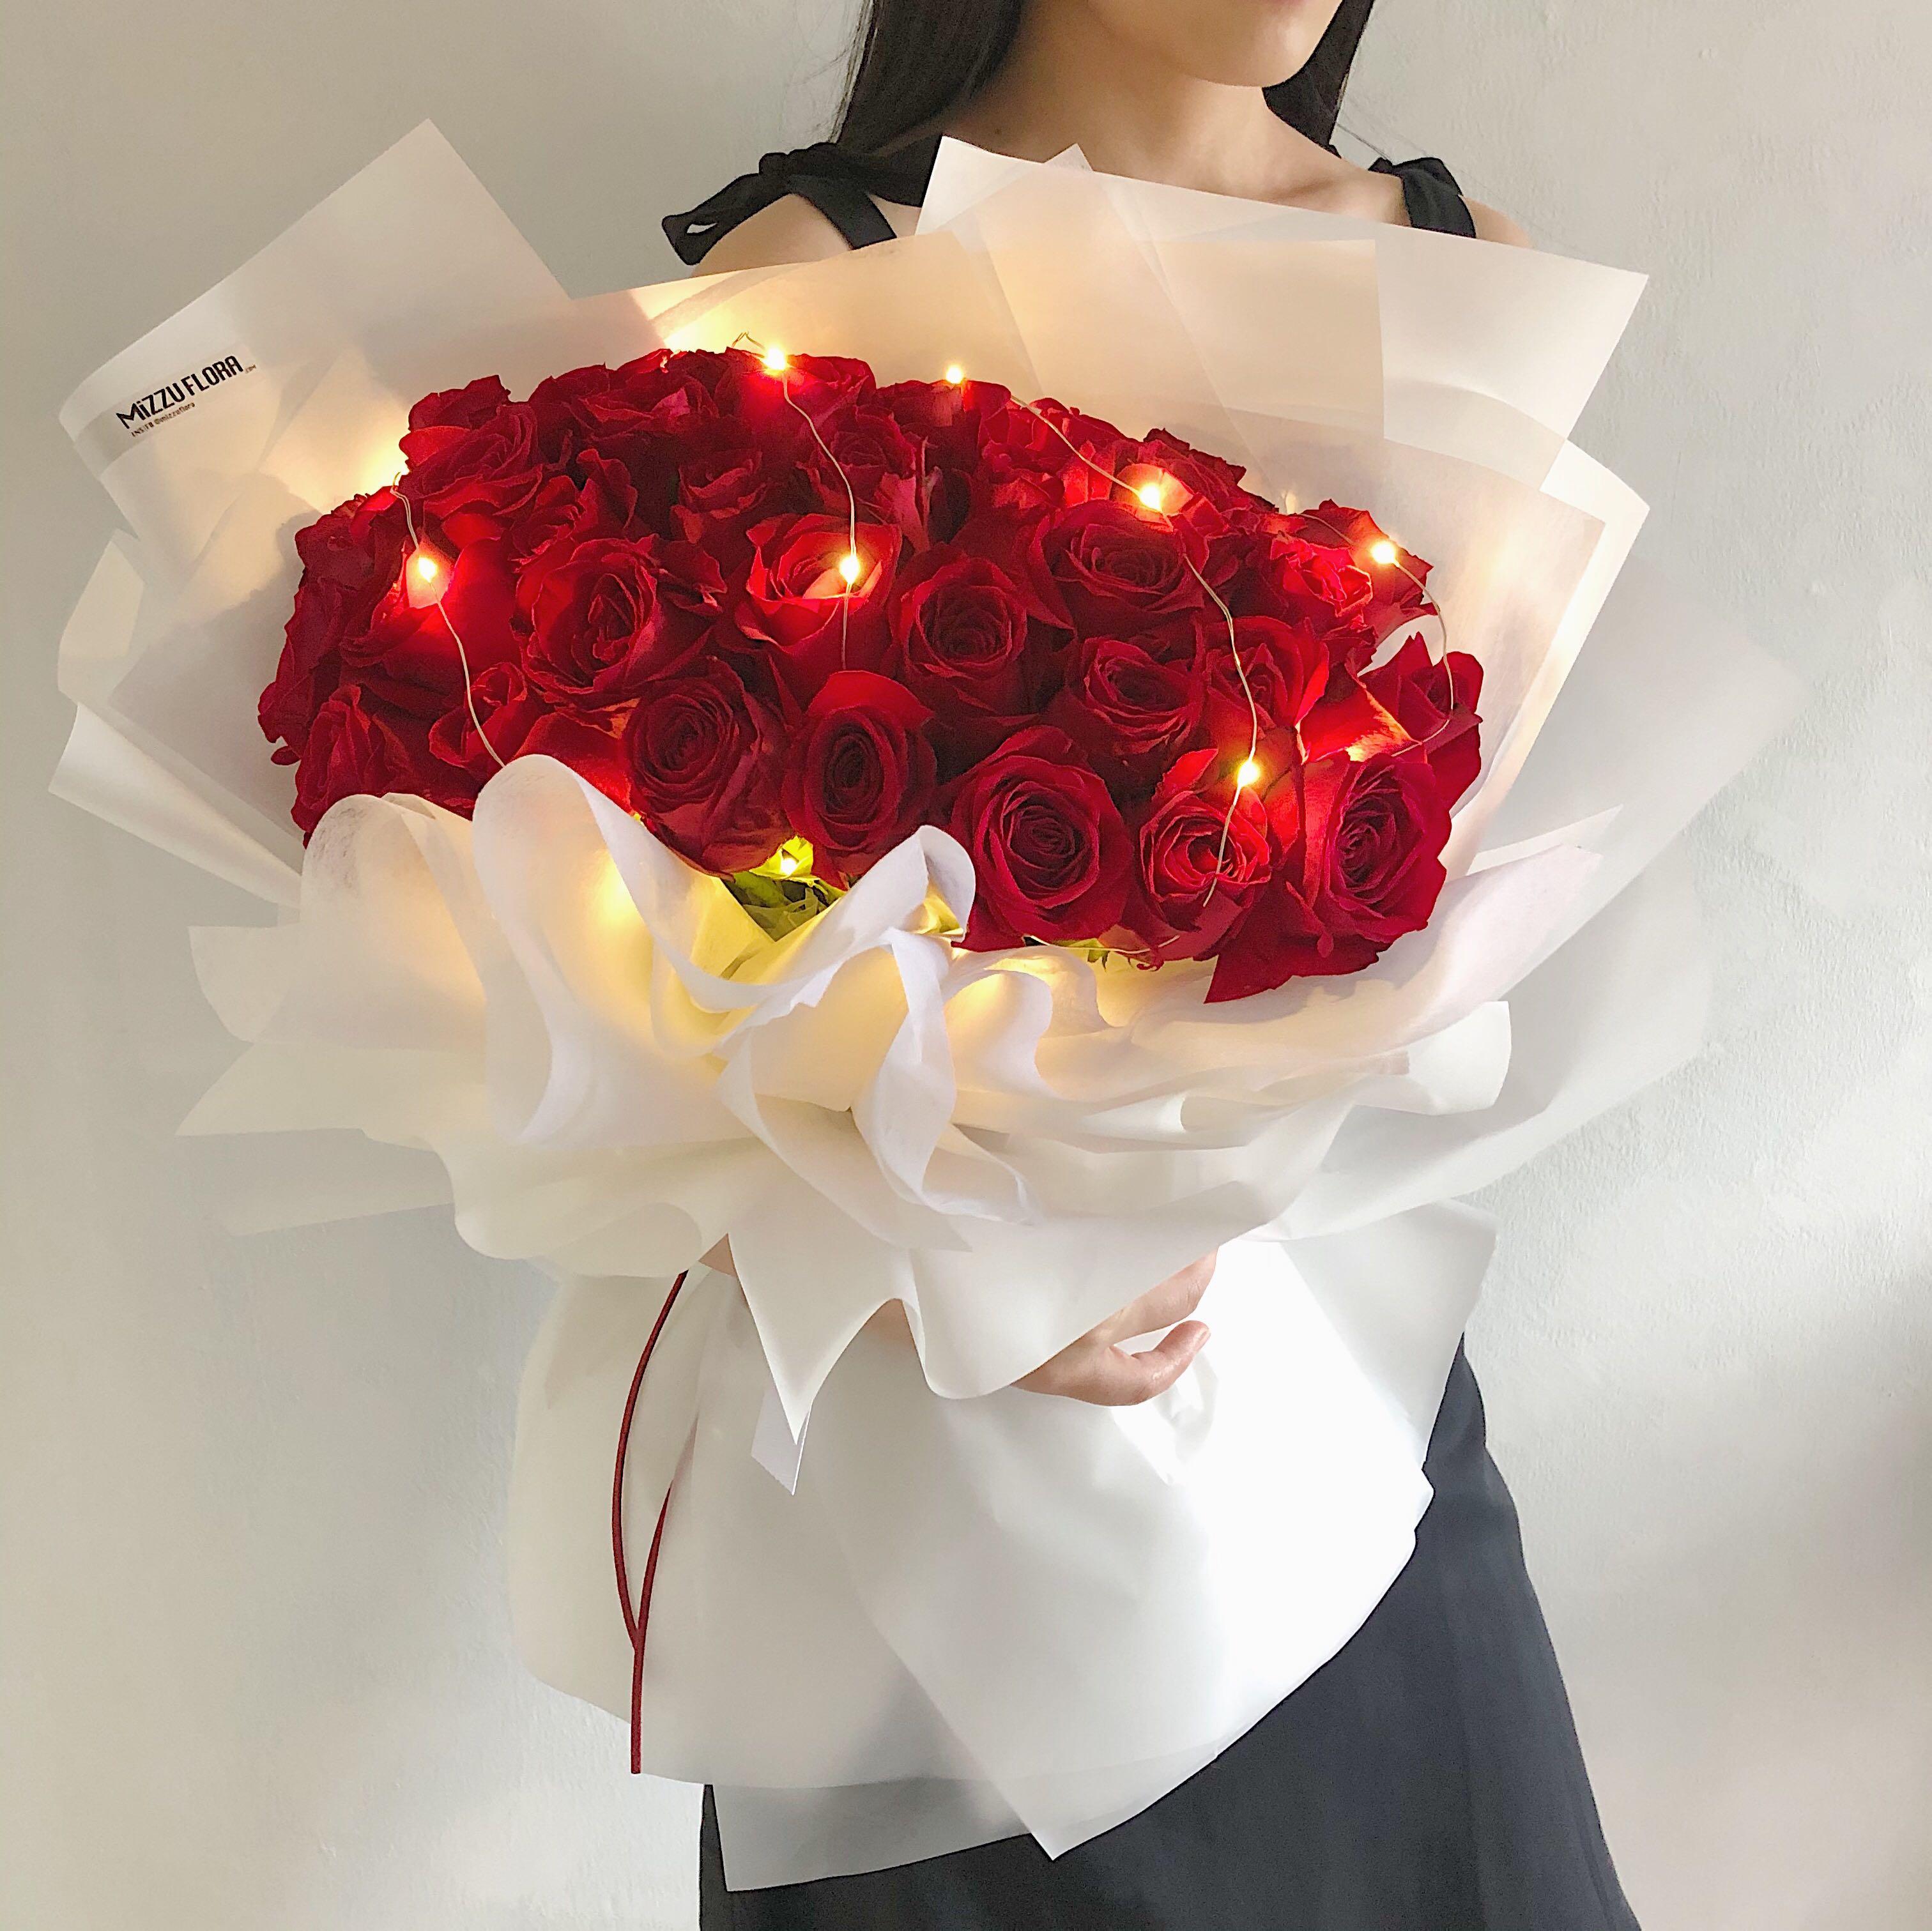 Proposal Bouquet 40 Roses Rose Bouquet 52 Roses 99 Roses Birthday Flower Bouquet Hobbies Toys Stationery Craft Flowers Bouquets On Carousell